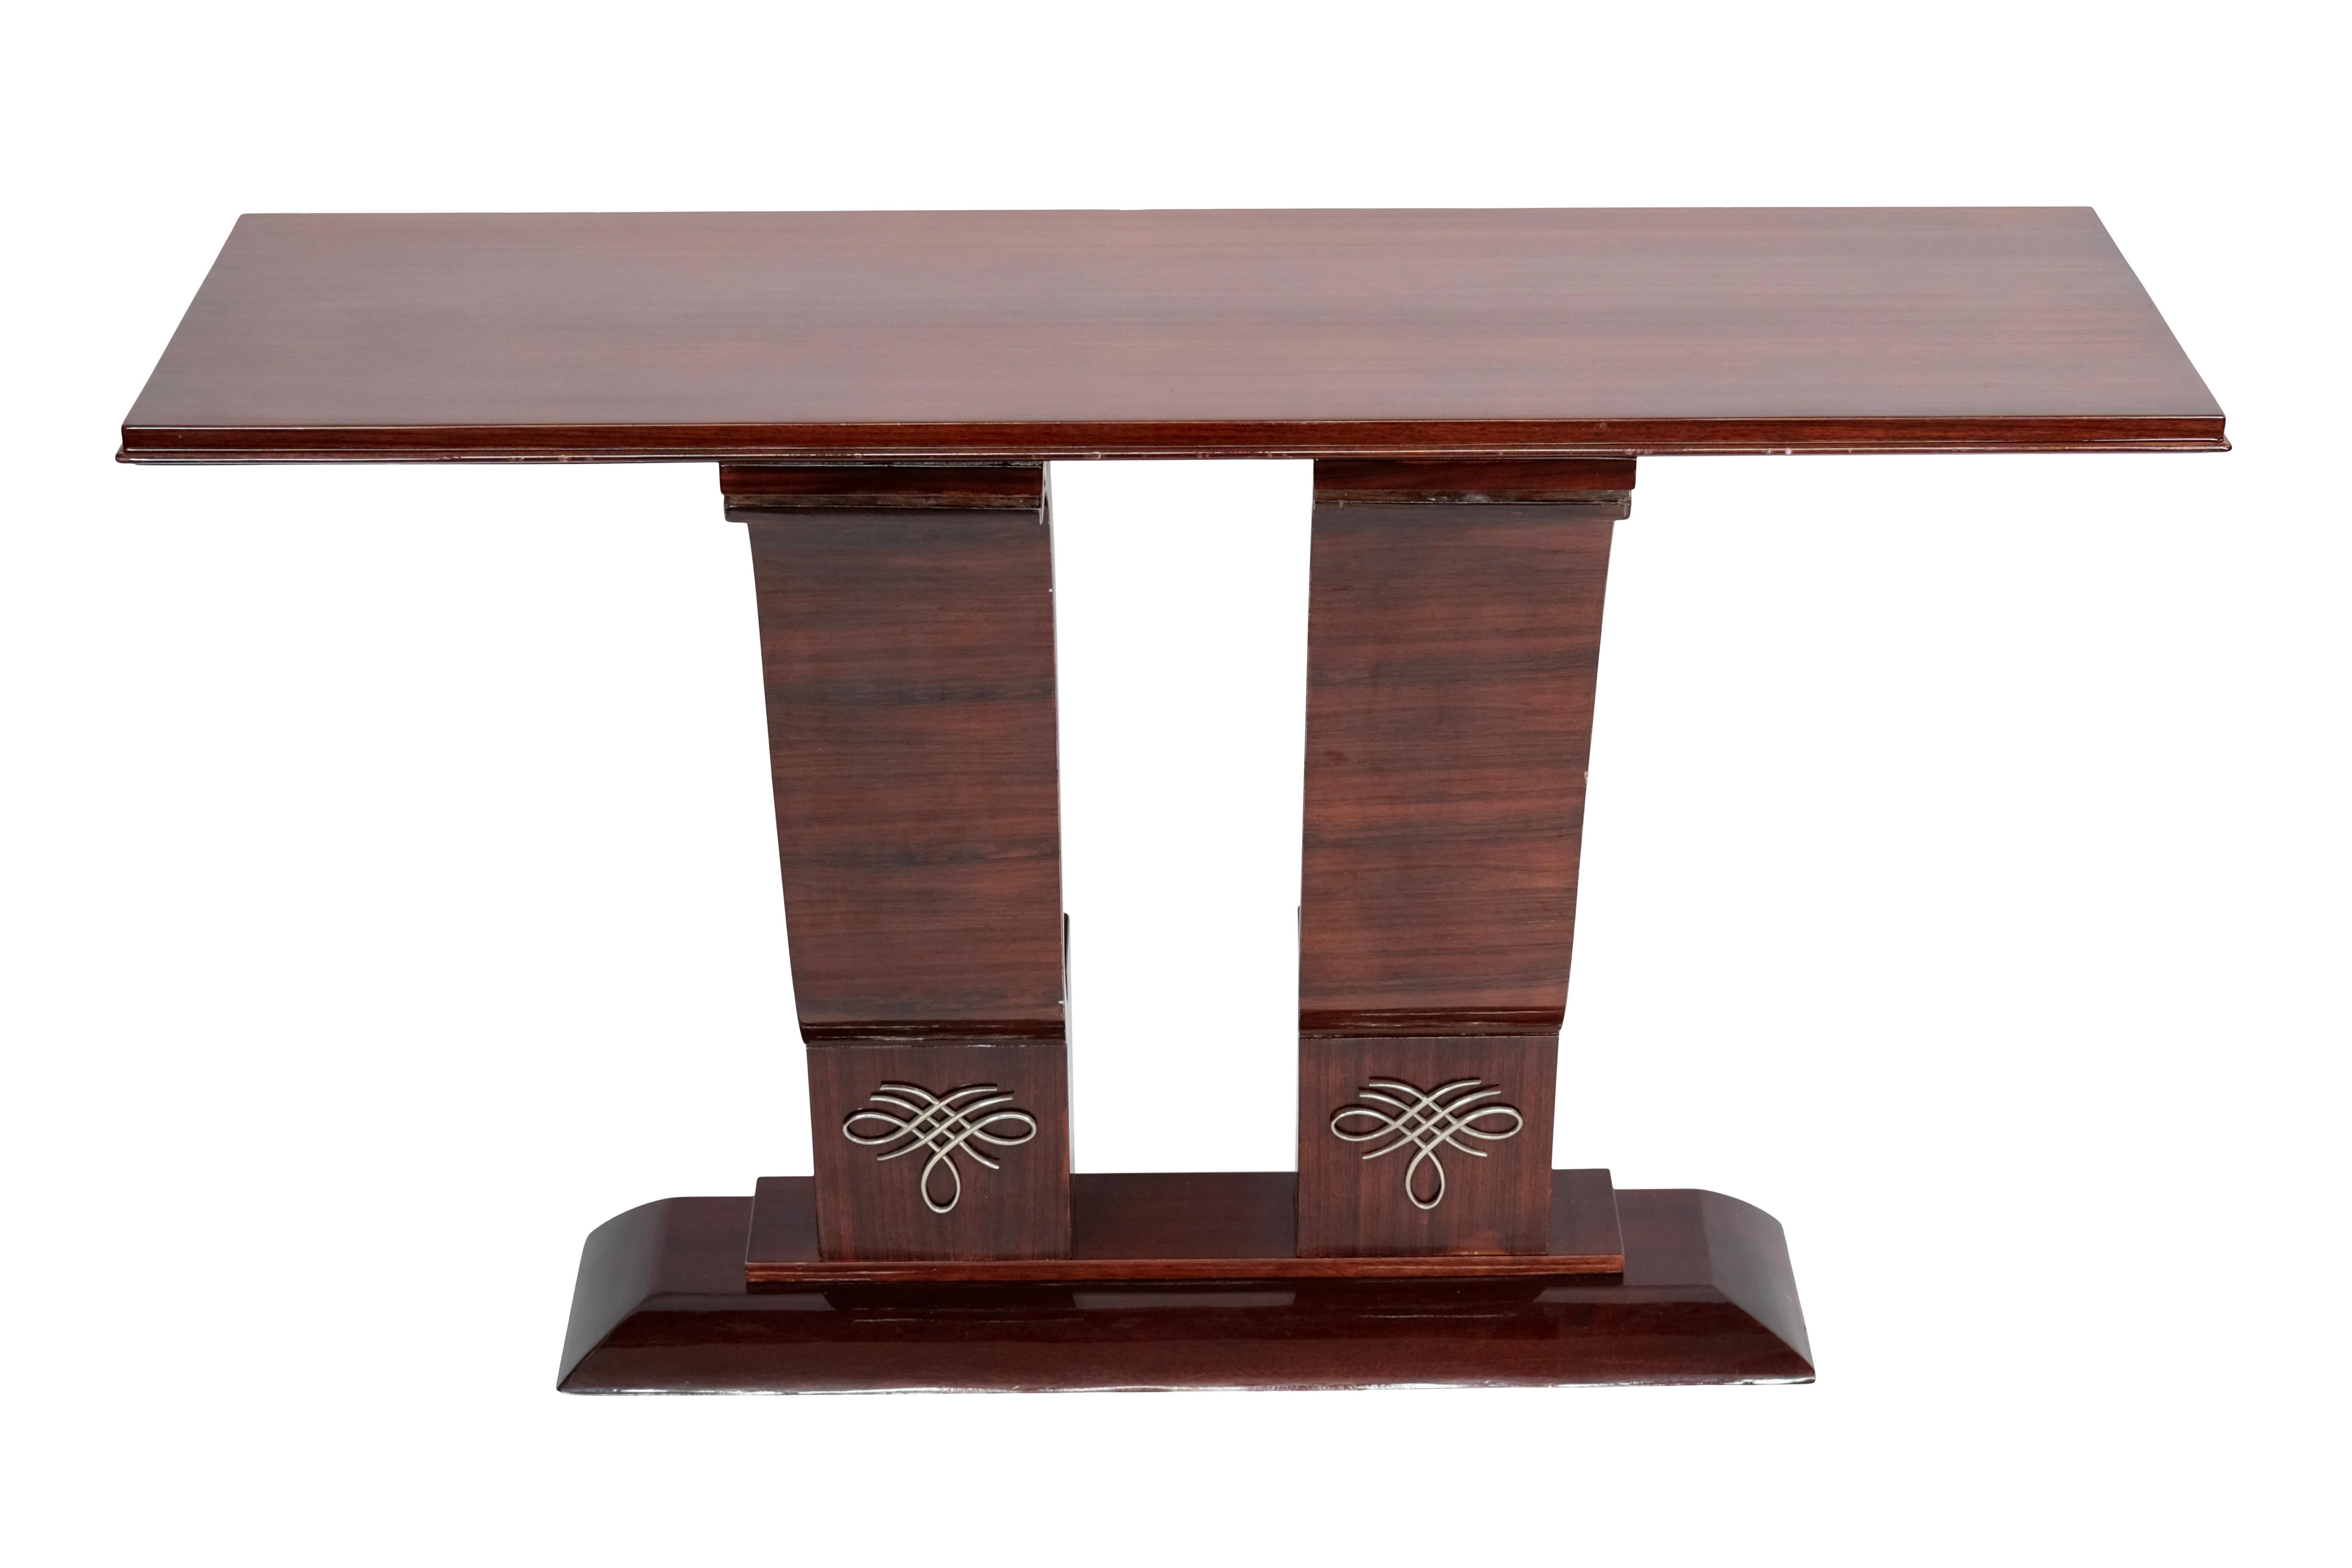 1930s French Art Deco Console Table in Mahogany In Fair Condition For Sale In Ulm, DE